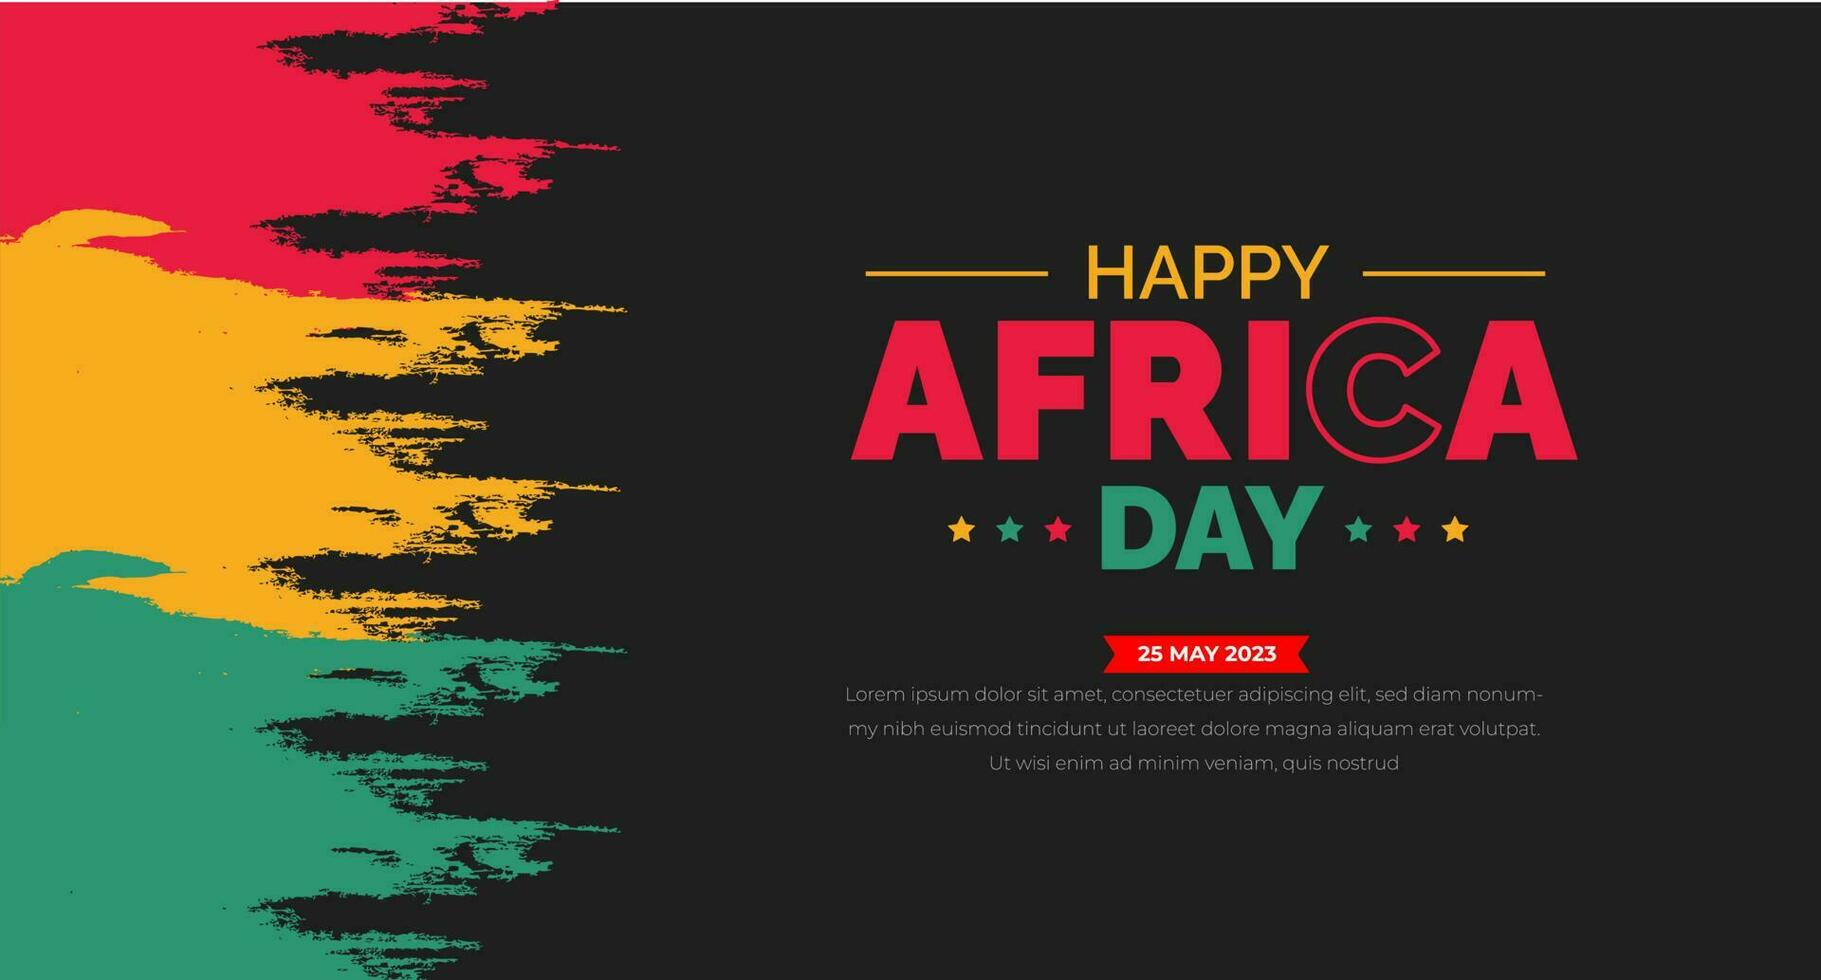 happy Africa day background or banner design Template. vector